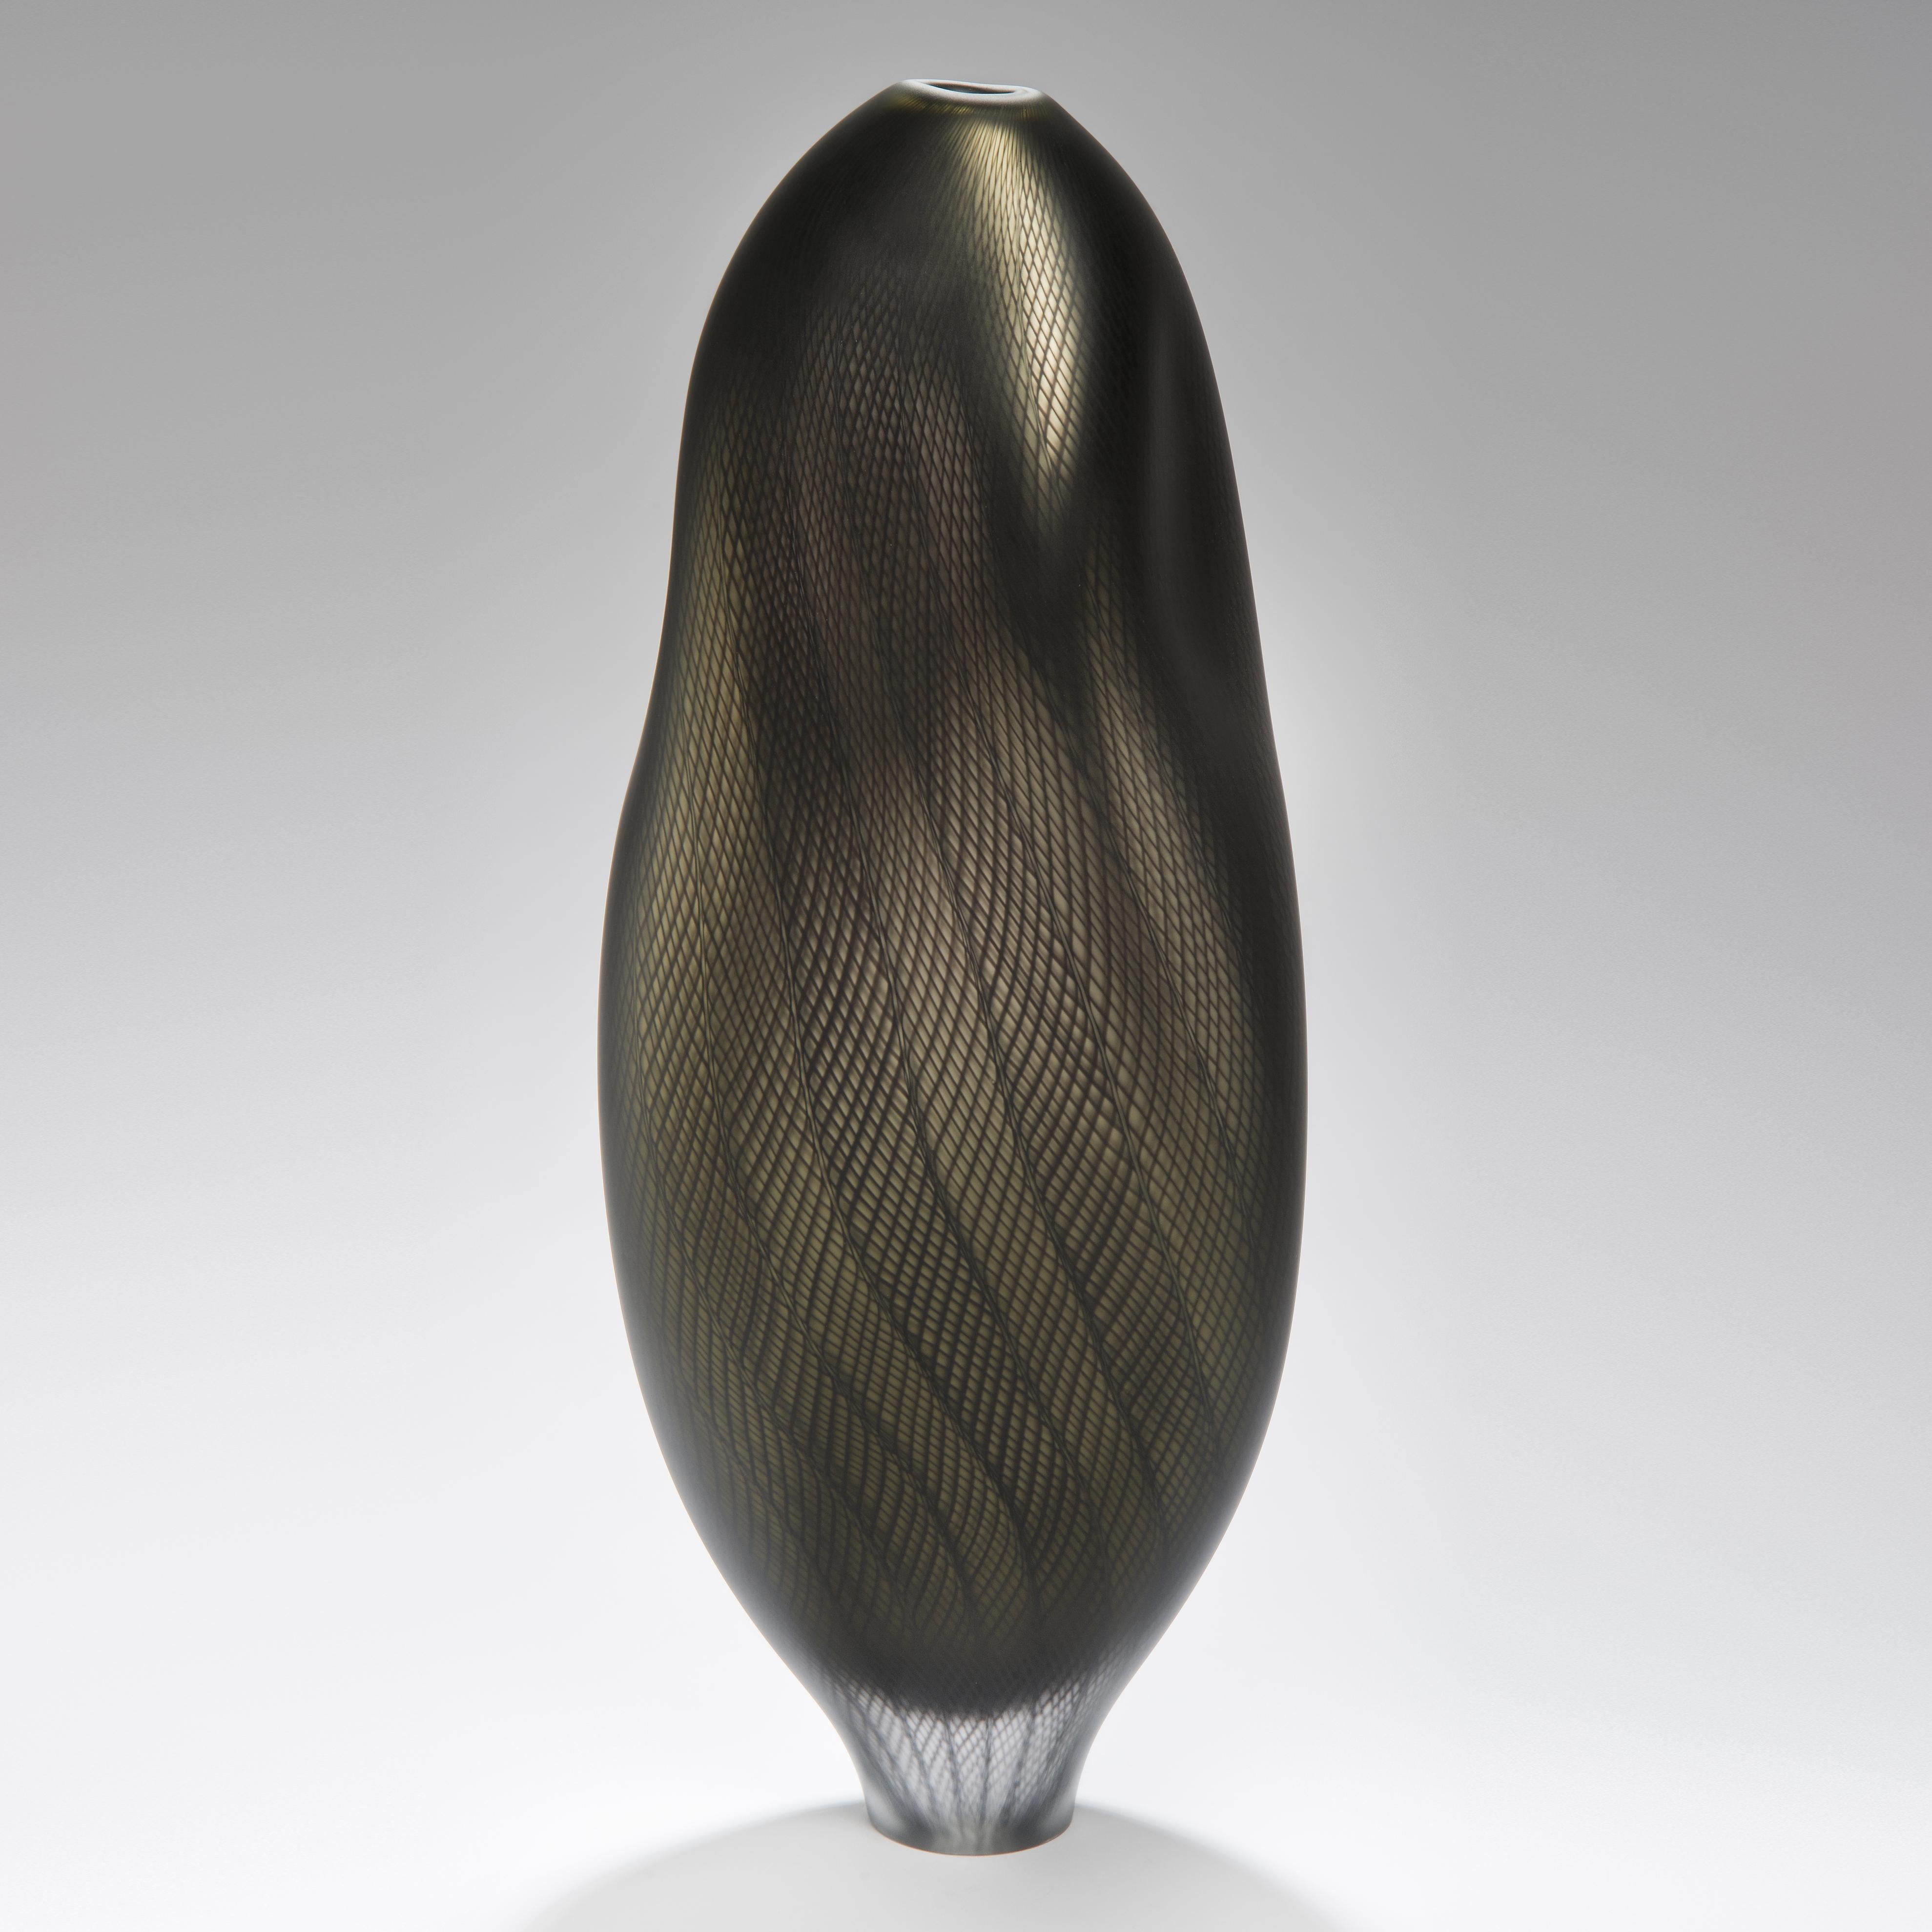 Stratiform Aes Zanfirico 001 is a unique hand blown glass vessel with fine filigree cane detail created by the British artist Liam Reeves. hand blown in bronze and black coloured glass, the interior has a mirrored finish, which results in a